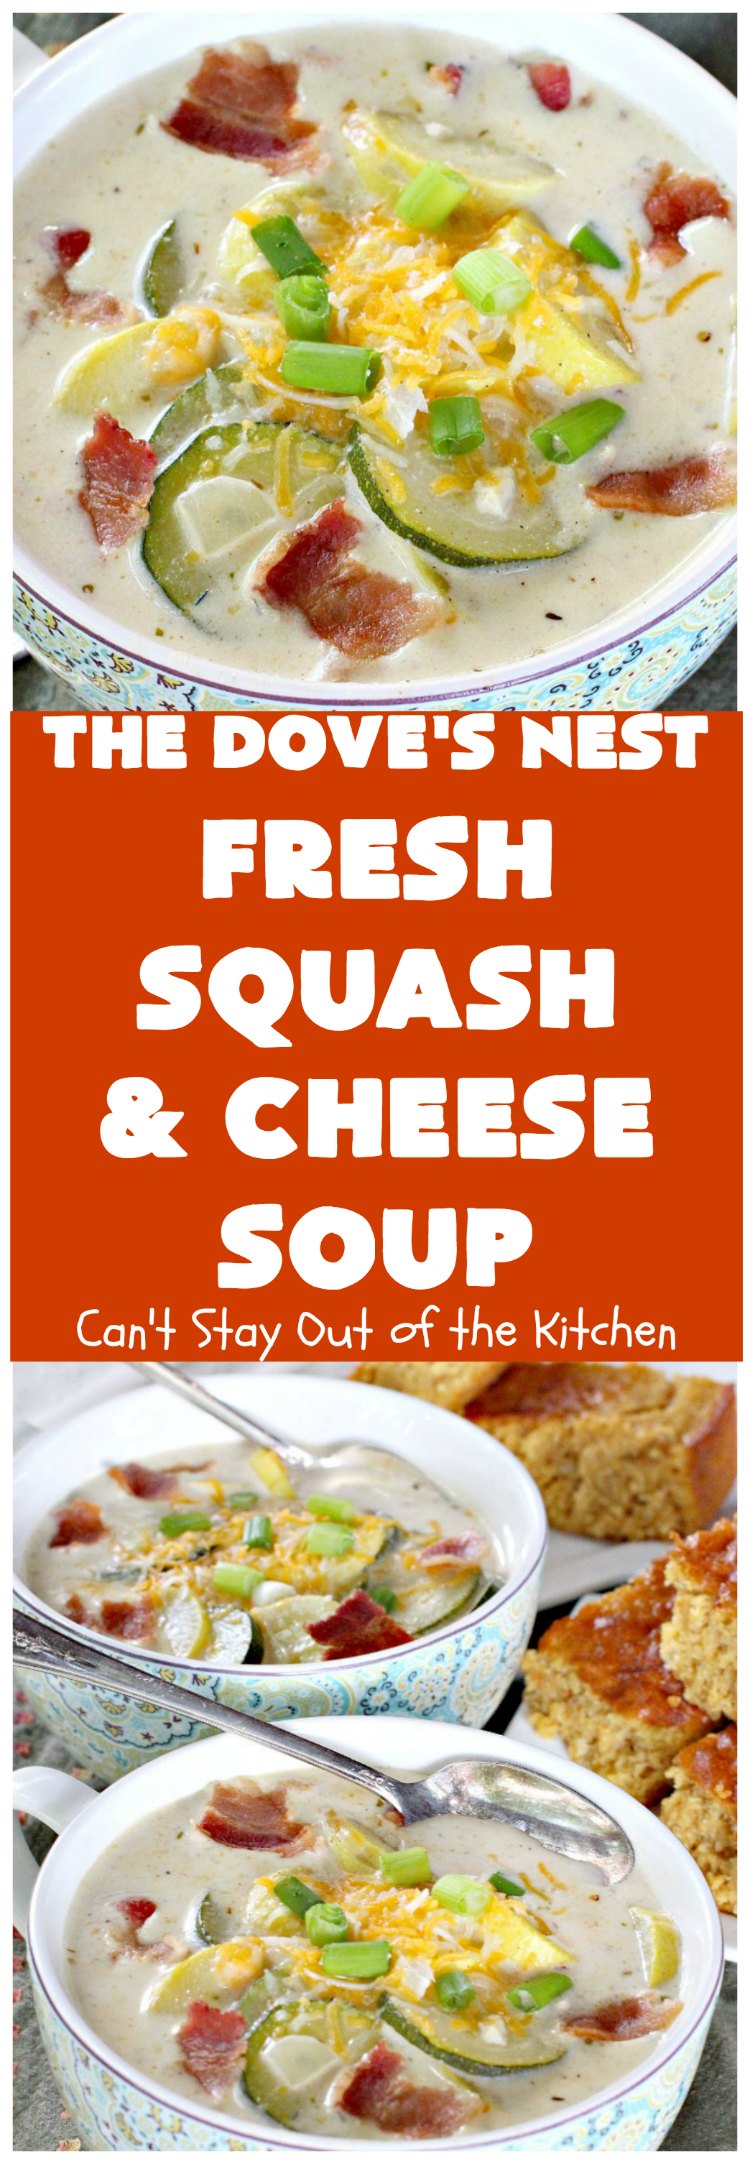 The Dove's Nest Fresh Squash and Cheese Soup | Can't Stay Out of the Kitchen